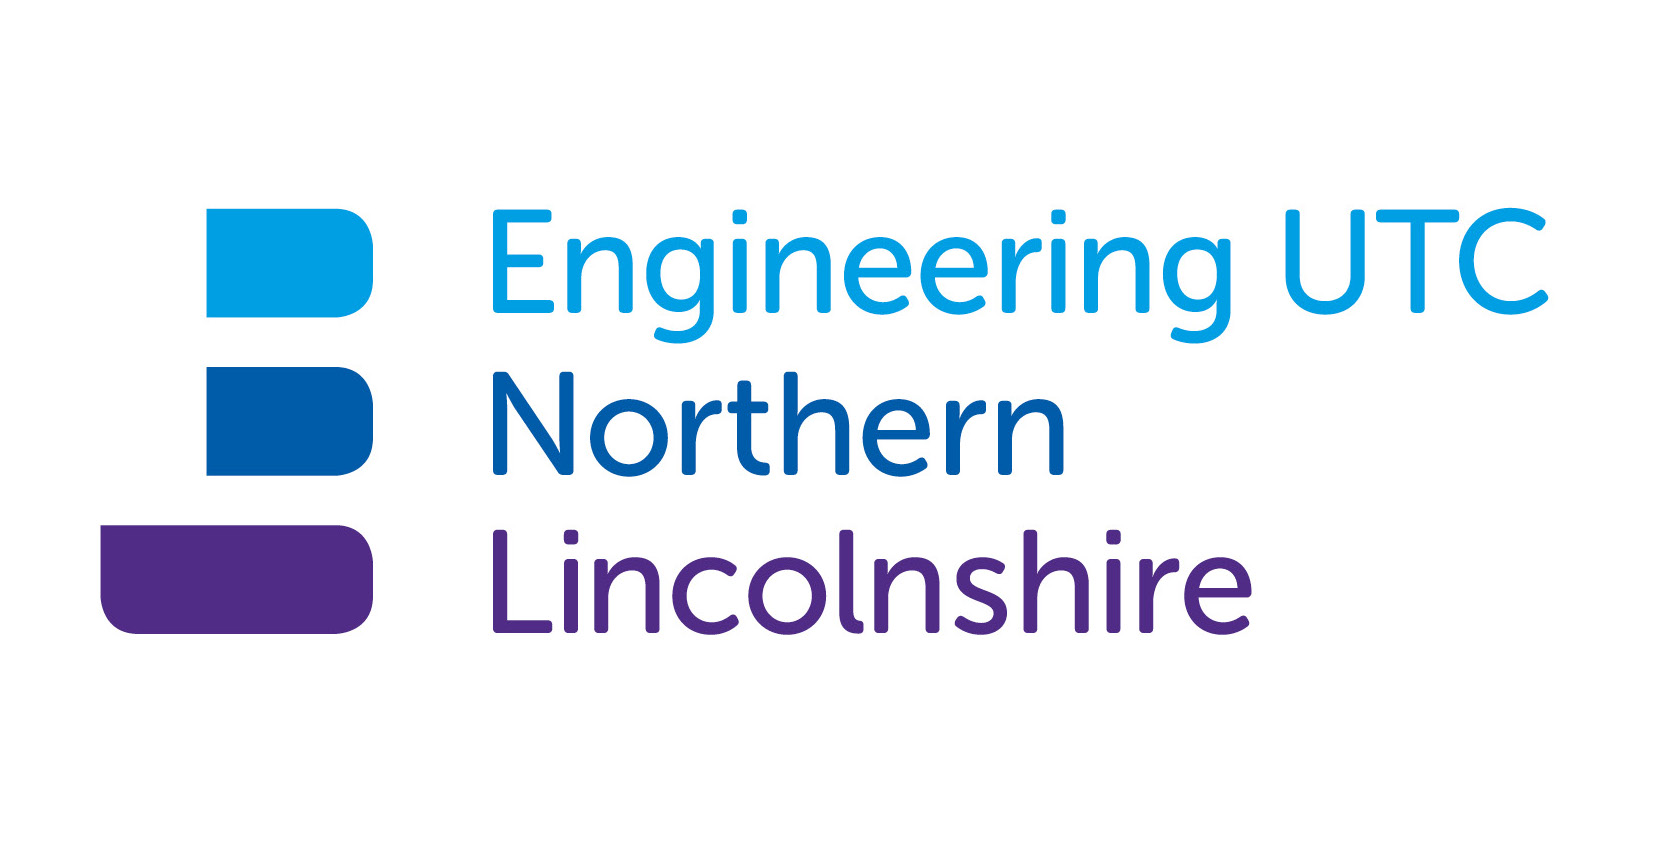 Why we’ve become Engineering UTC Northern Lincolnshire